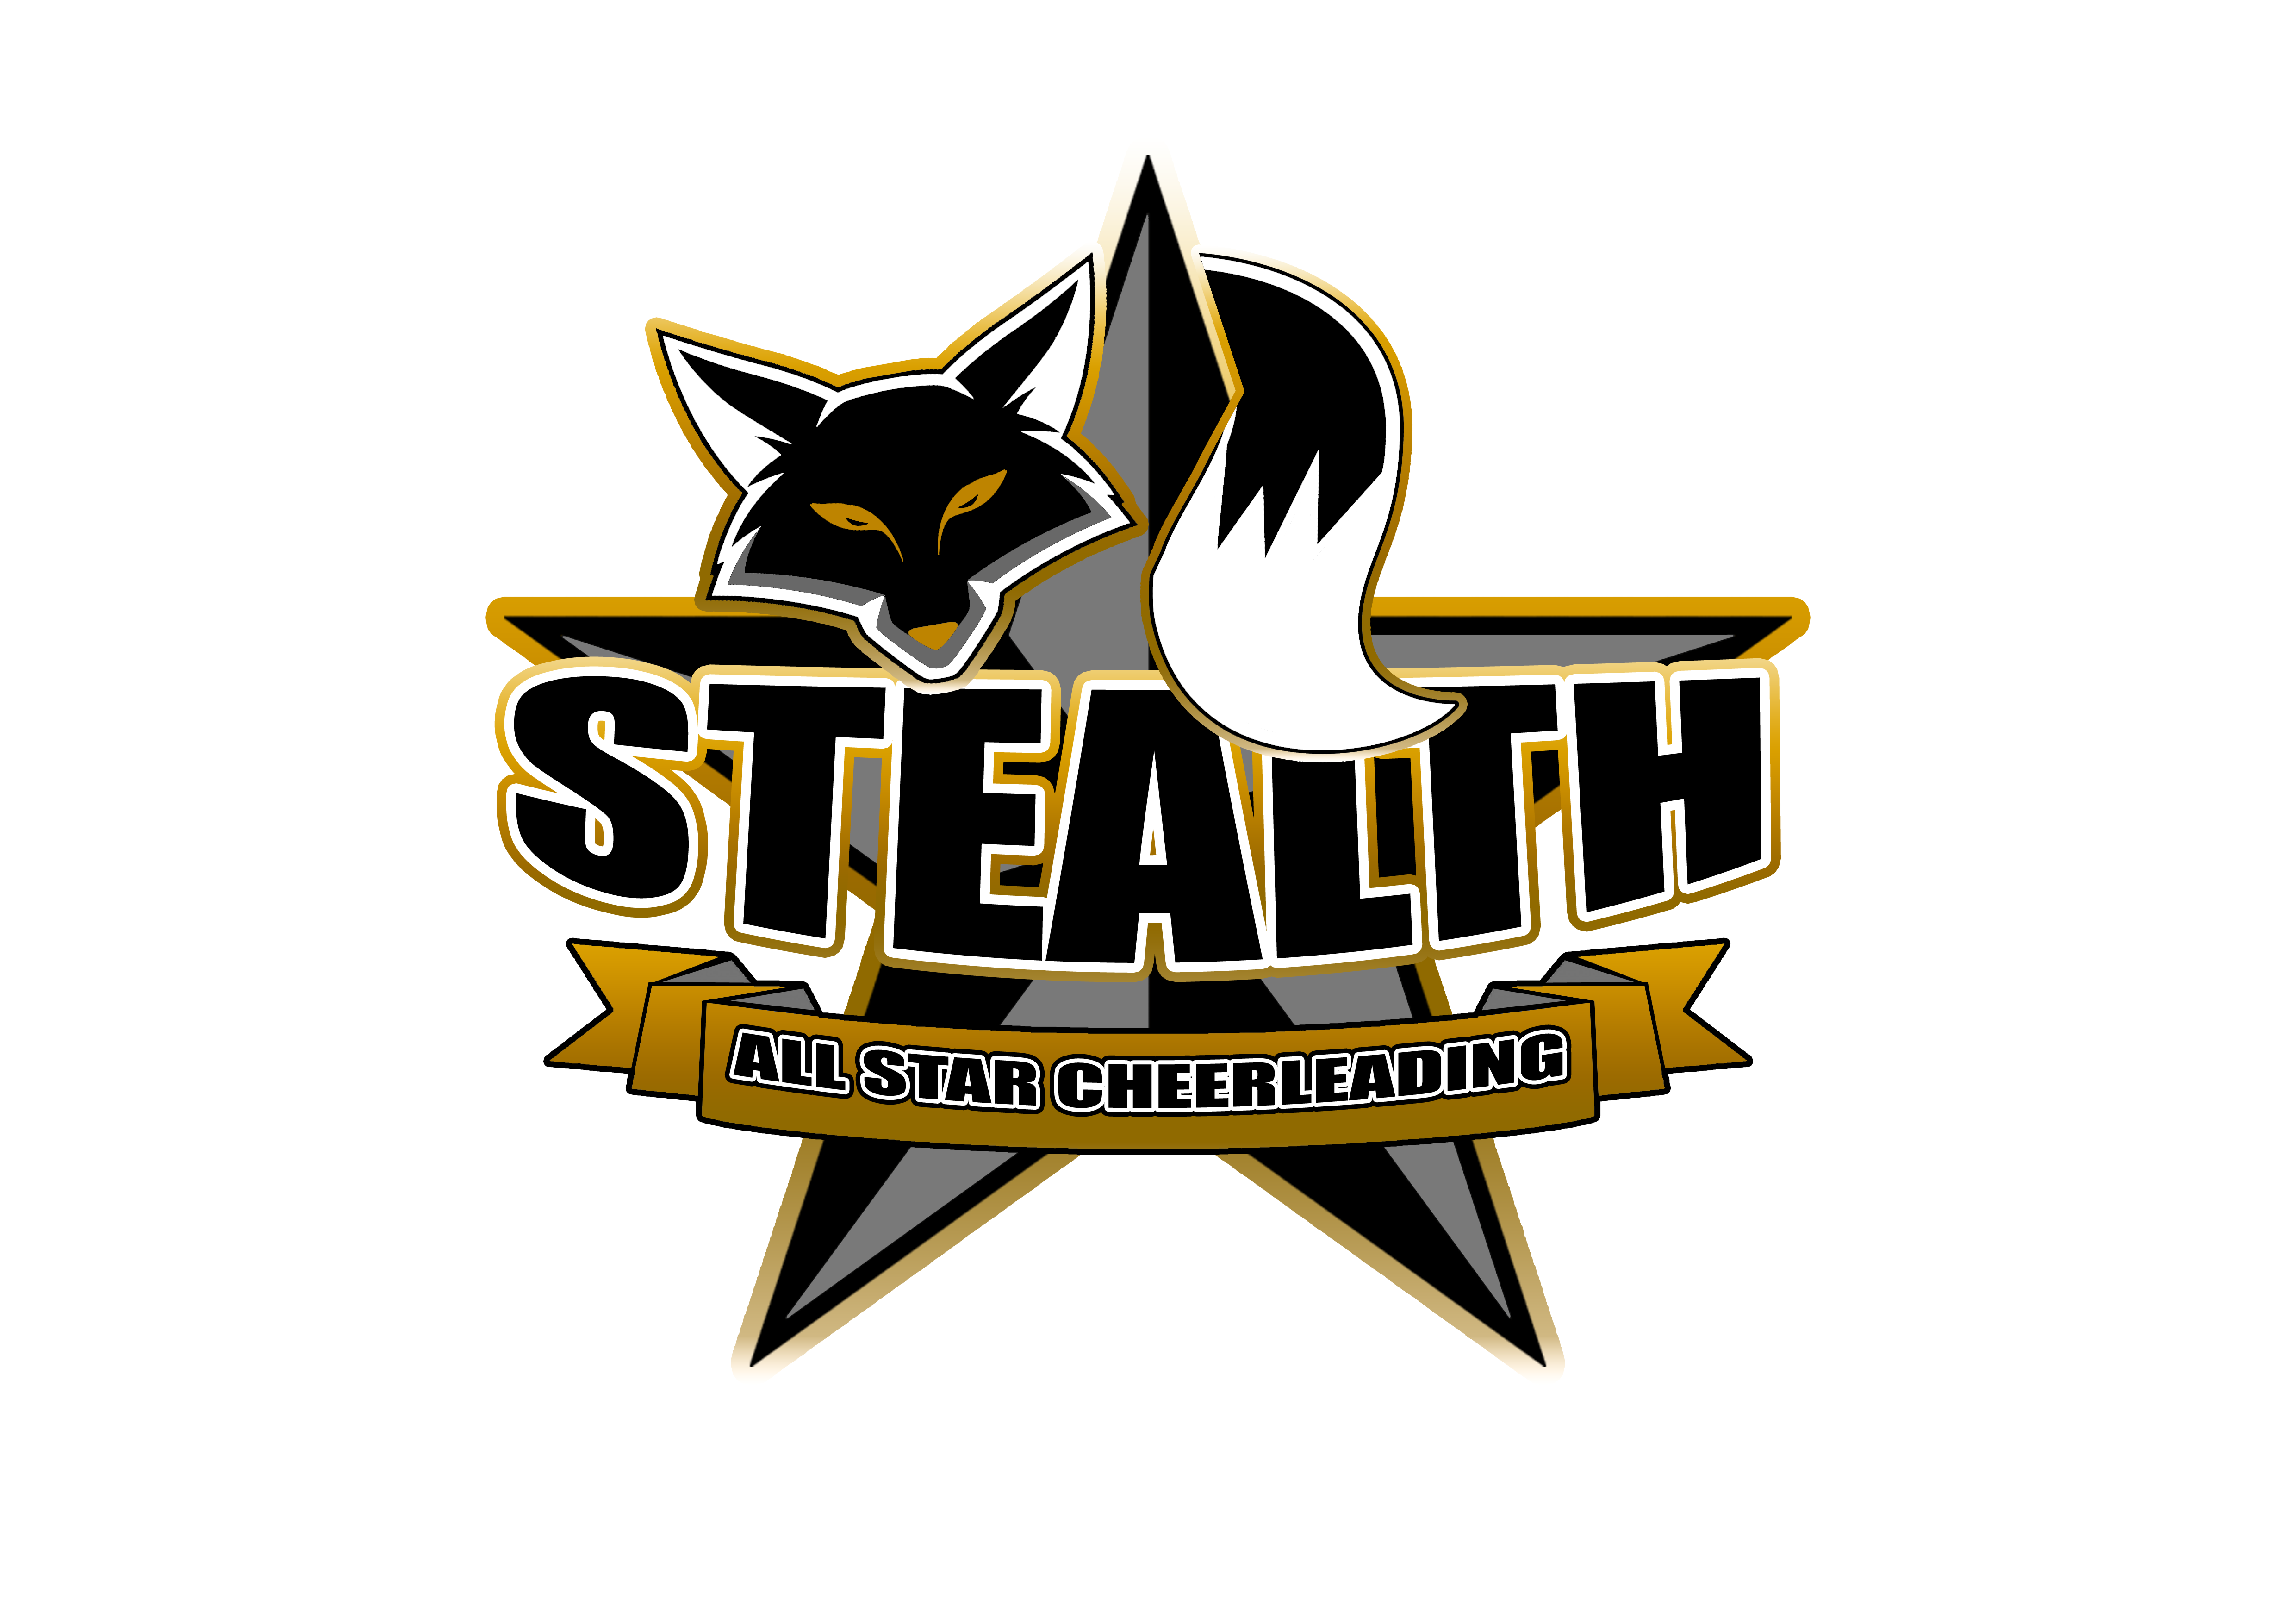 Stealth Cheer